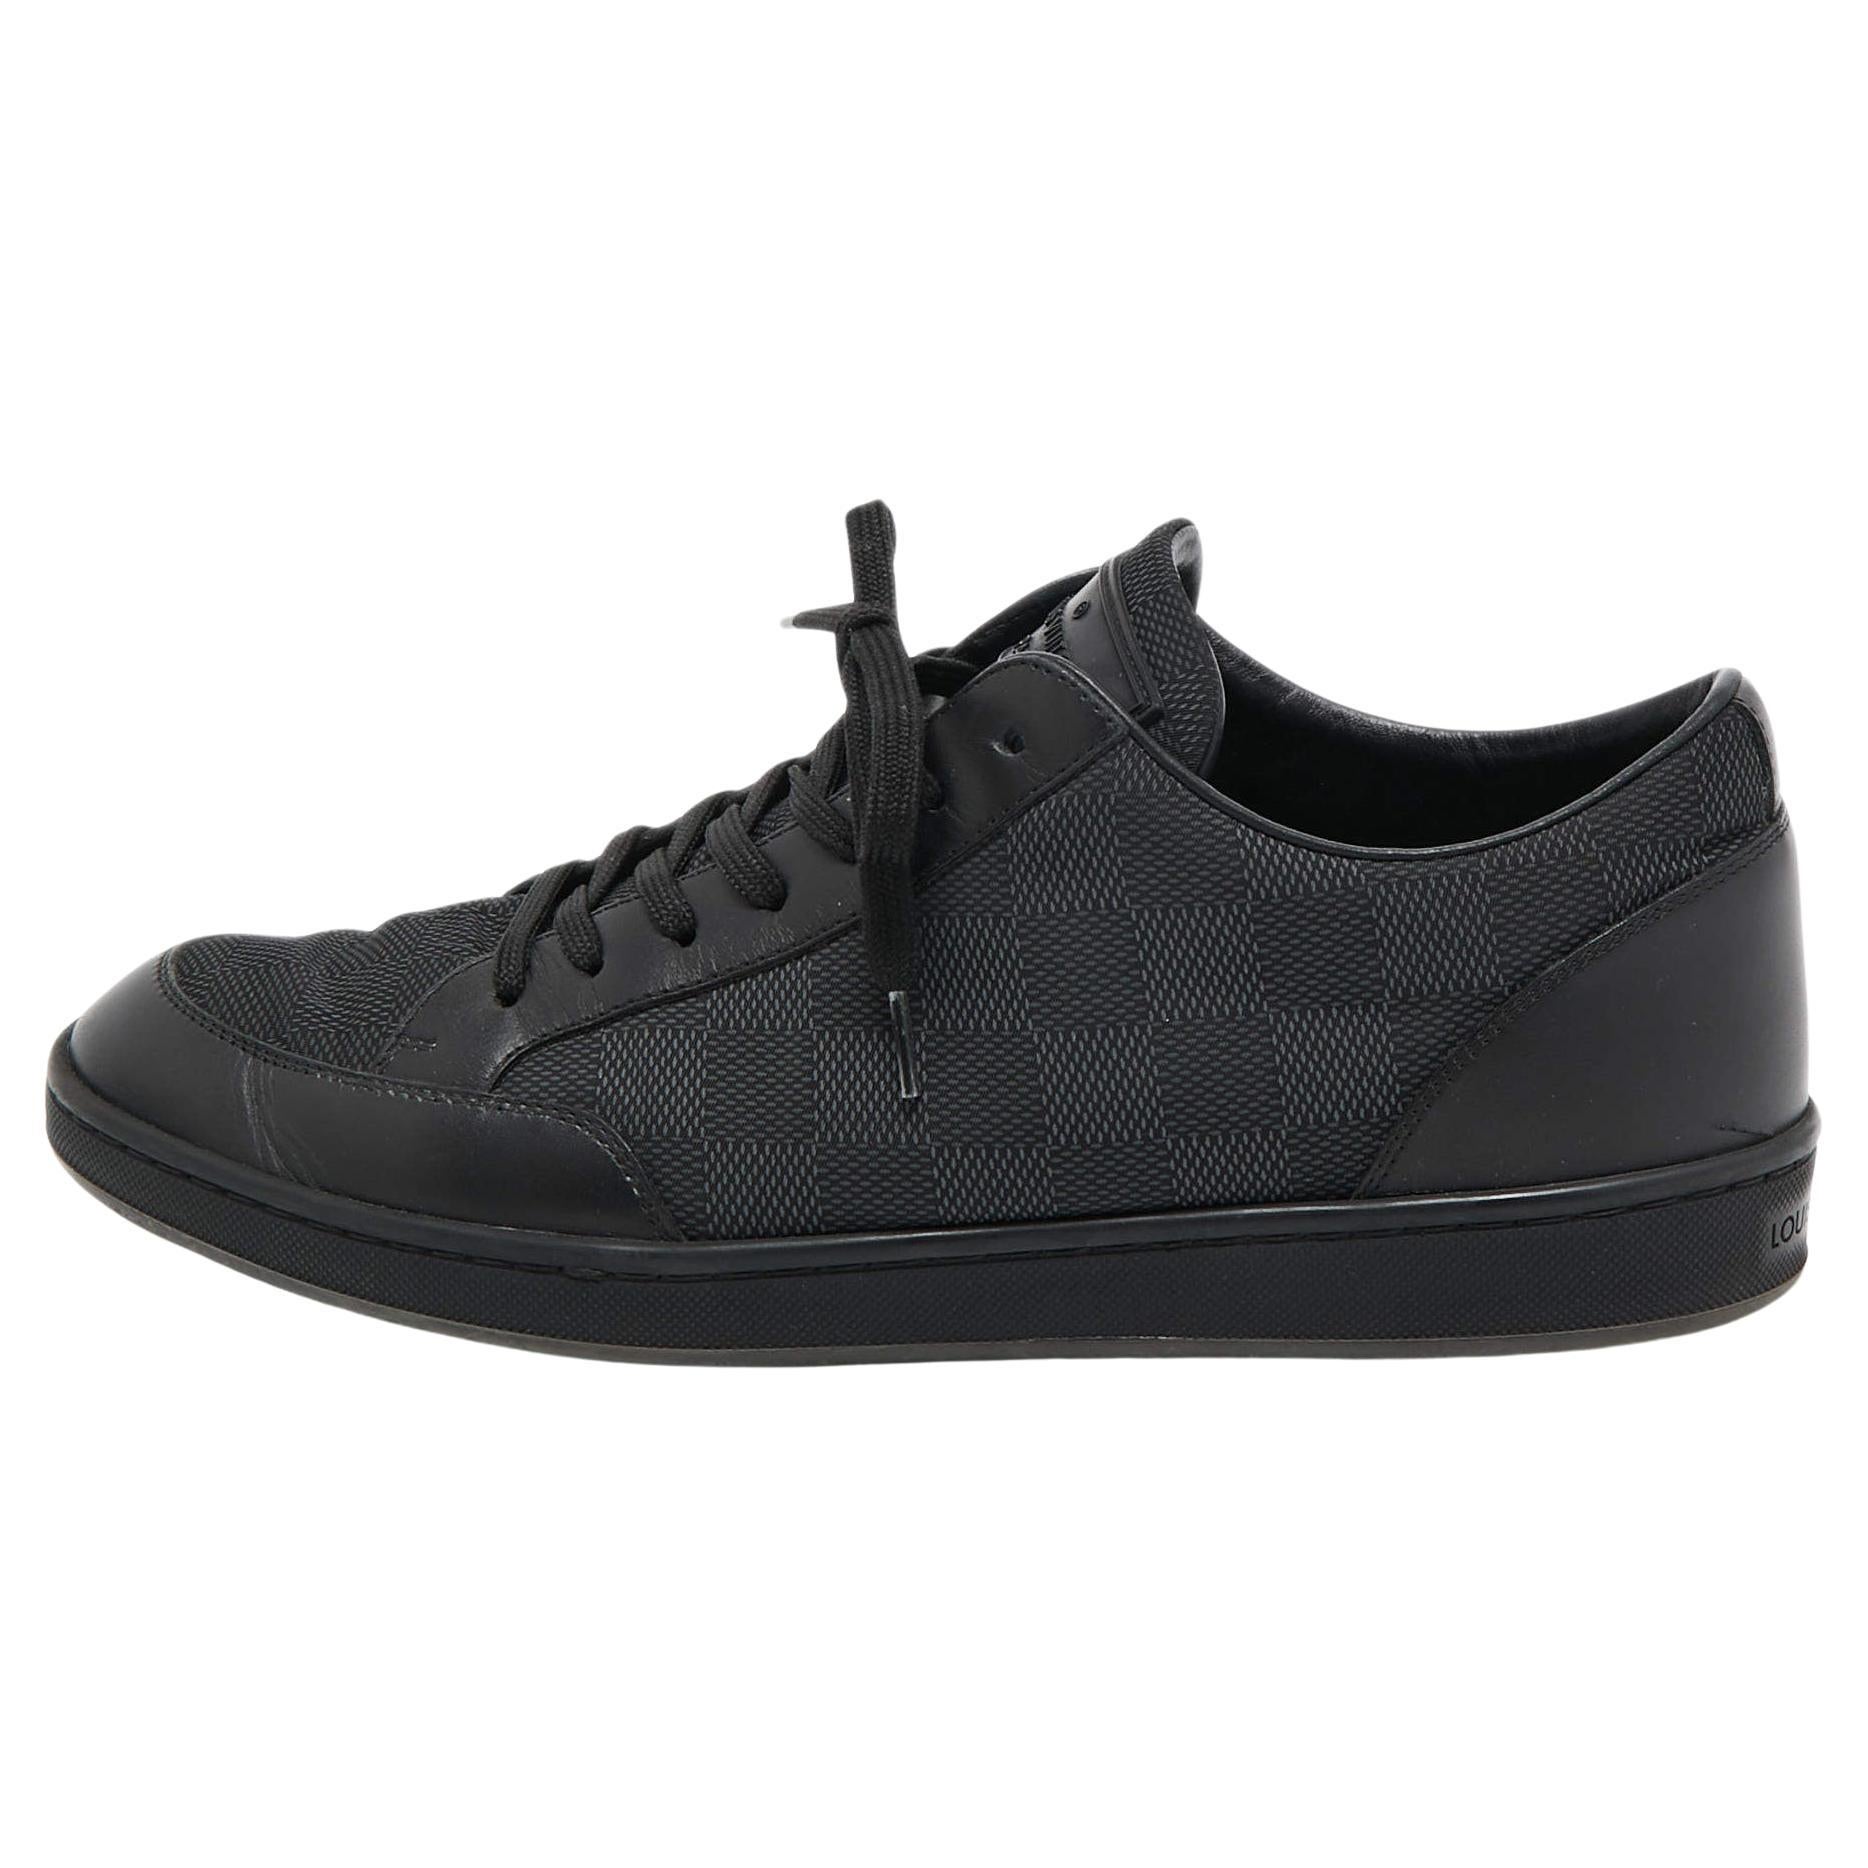 Louis Vuitton Black Leather and Nylon Low Top Sneakers Size 41 For Sale